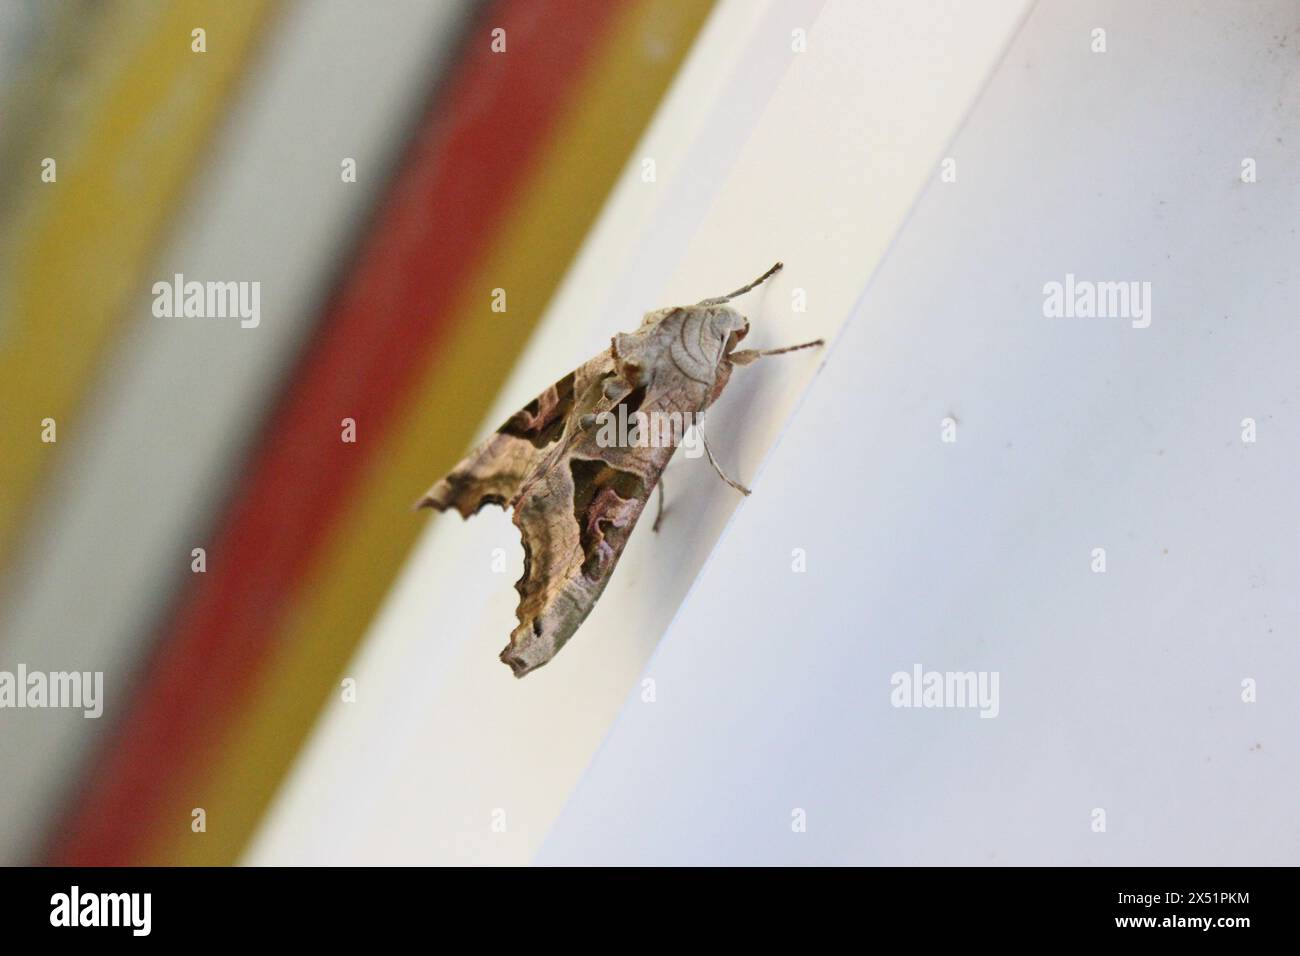 An Angle Shades (Phlogophora Meticulosa) Moth rests on a plastic doorframe Stock Photo